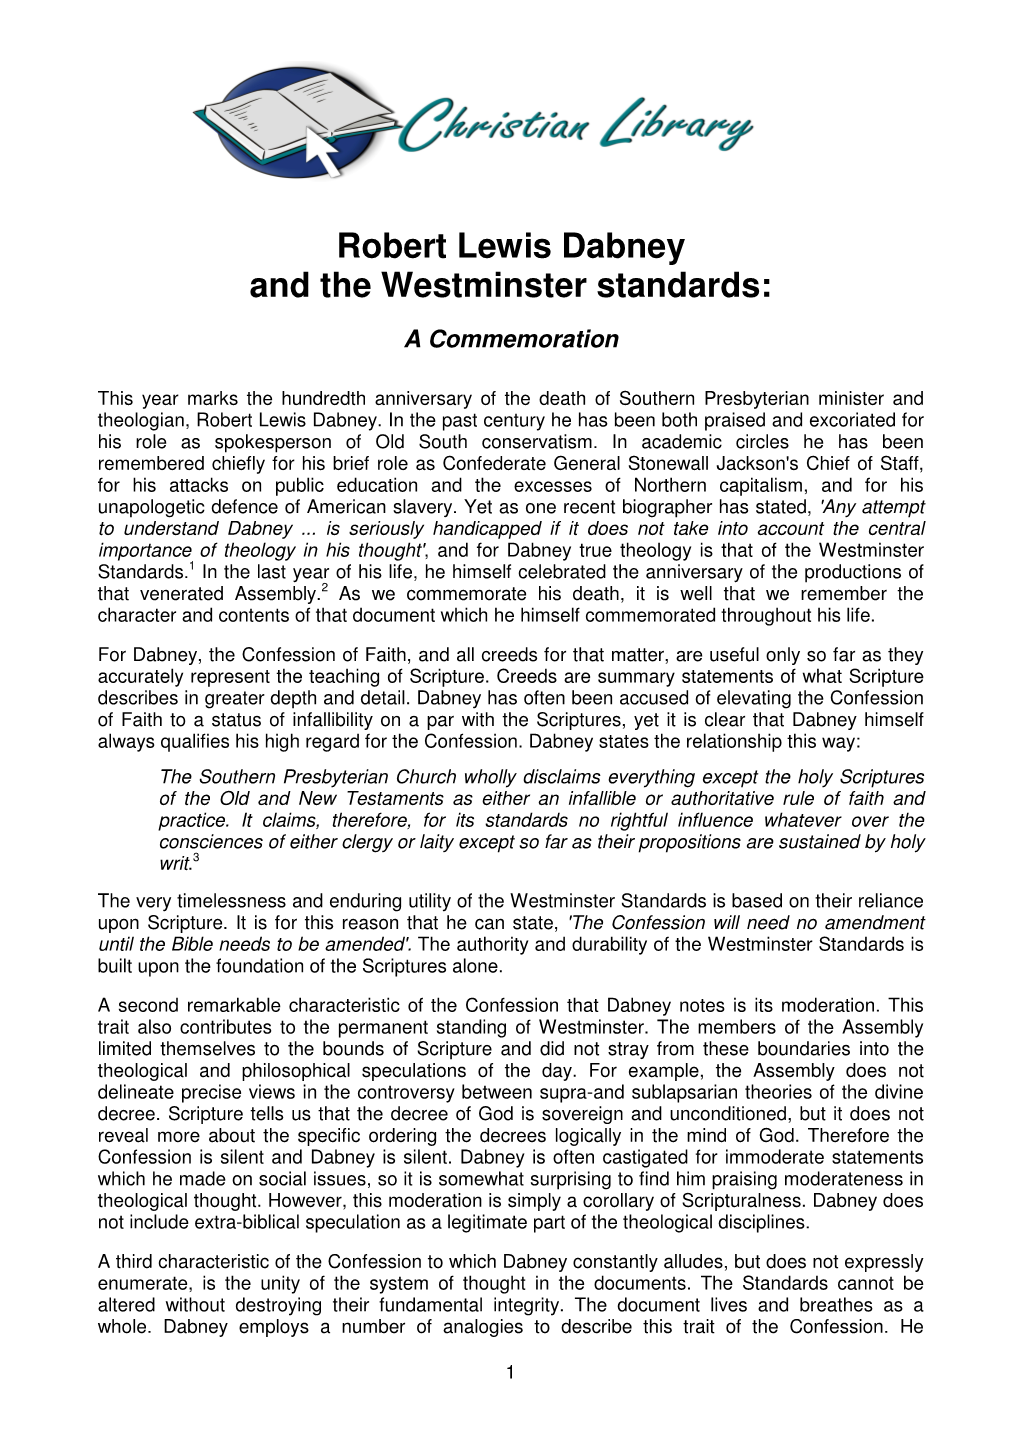 Robert Lewis Dabney and the Westminster Standards: a Commemoration